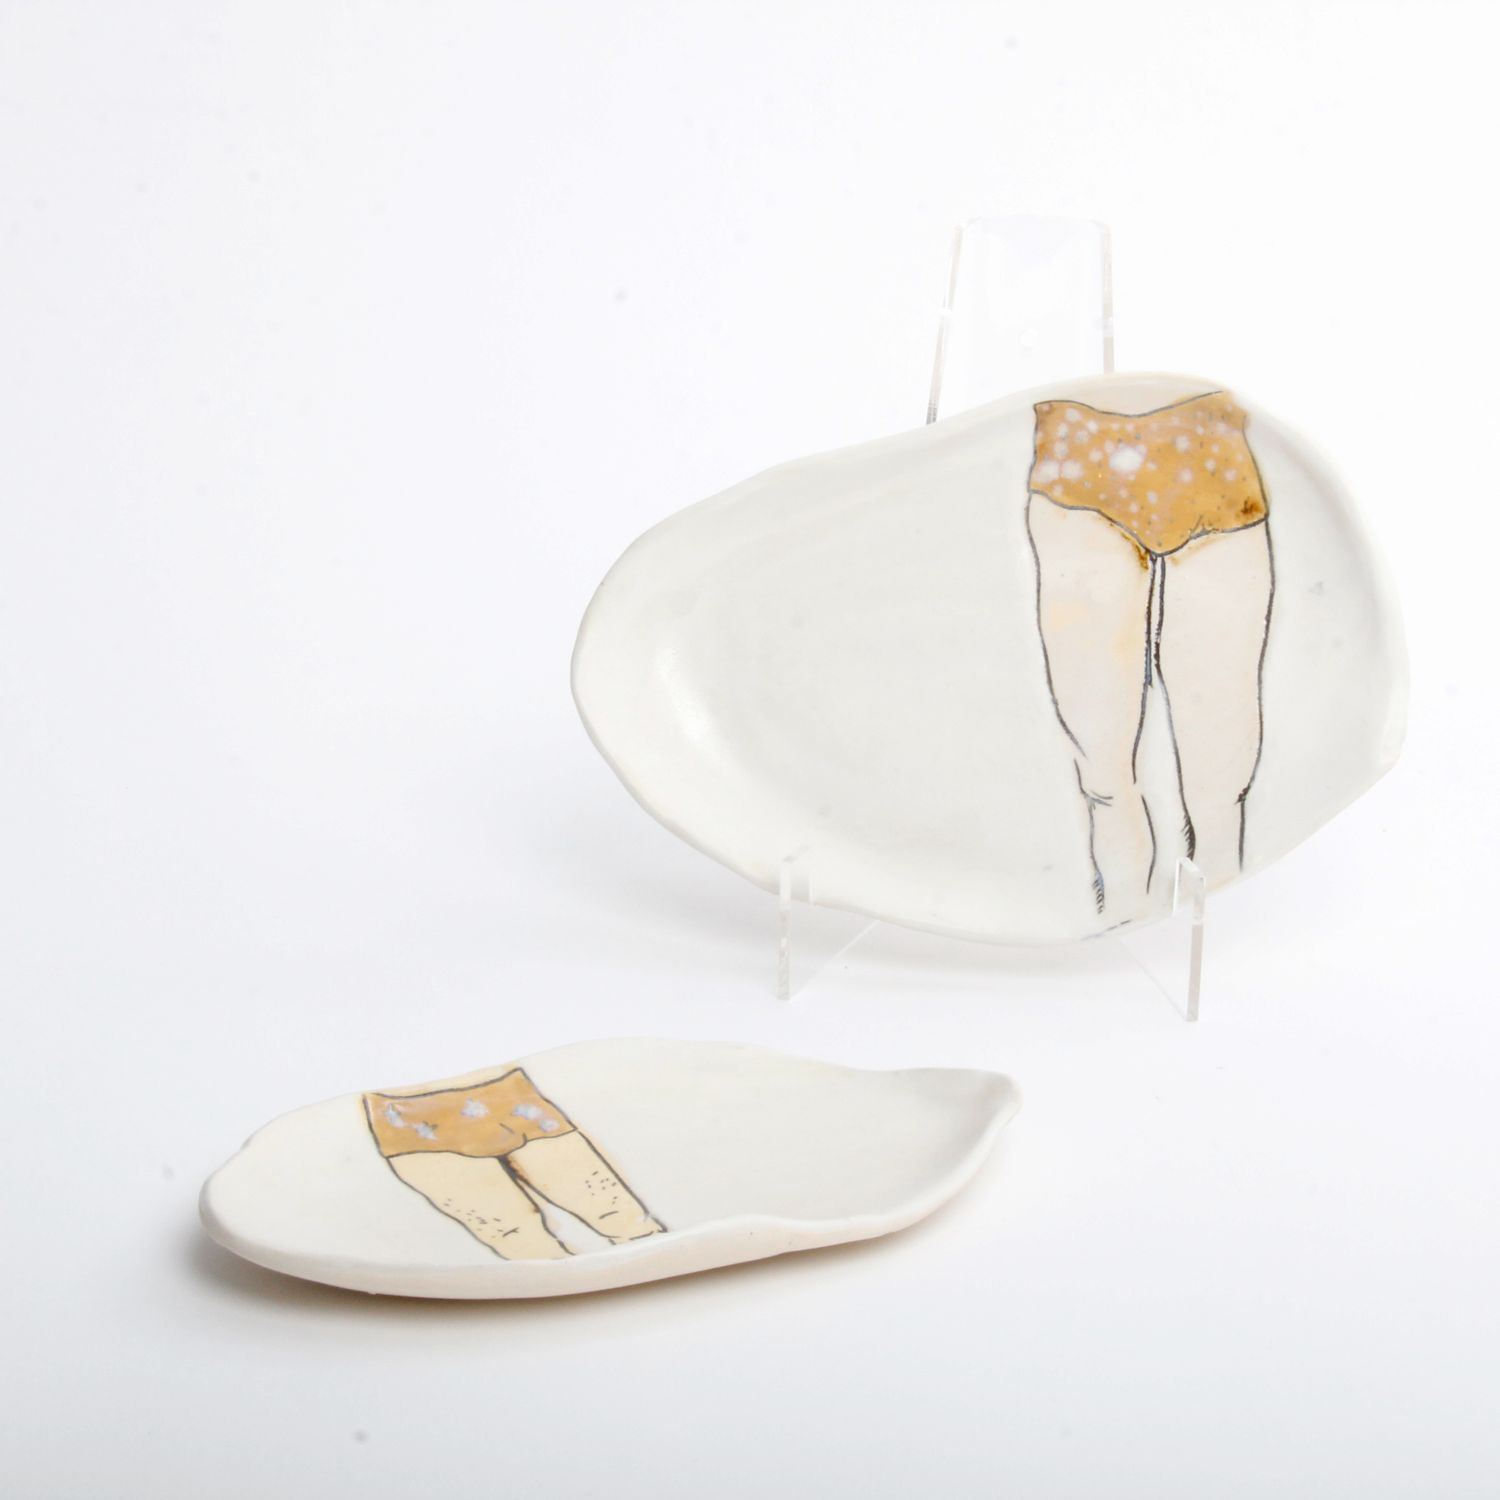 Lindsay Gravelle: Small Swimmer Plate Product Image 3 of 3